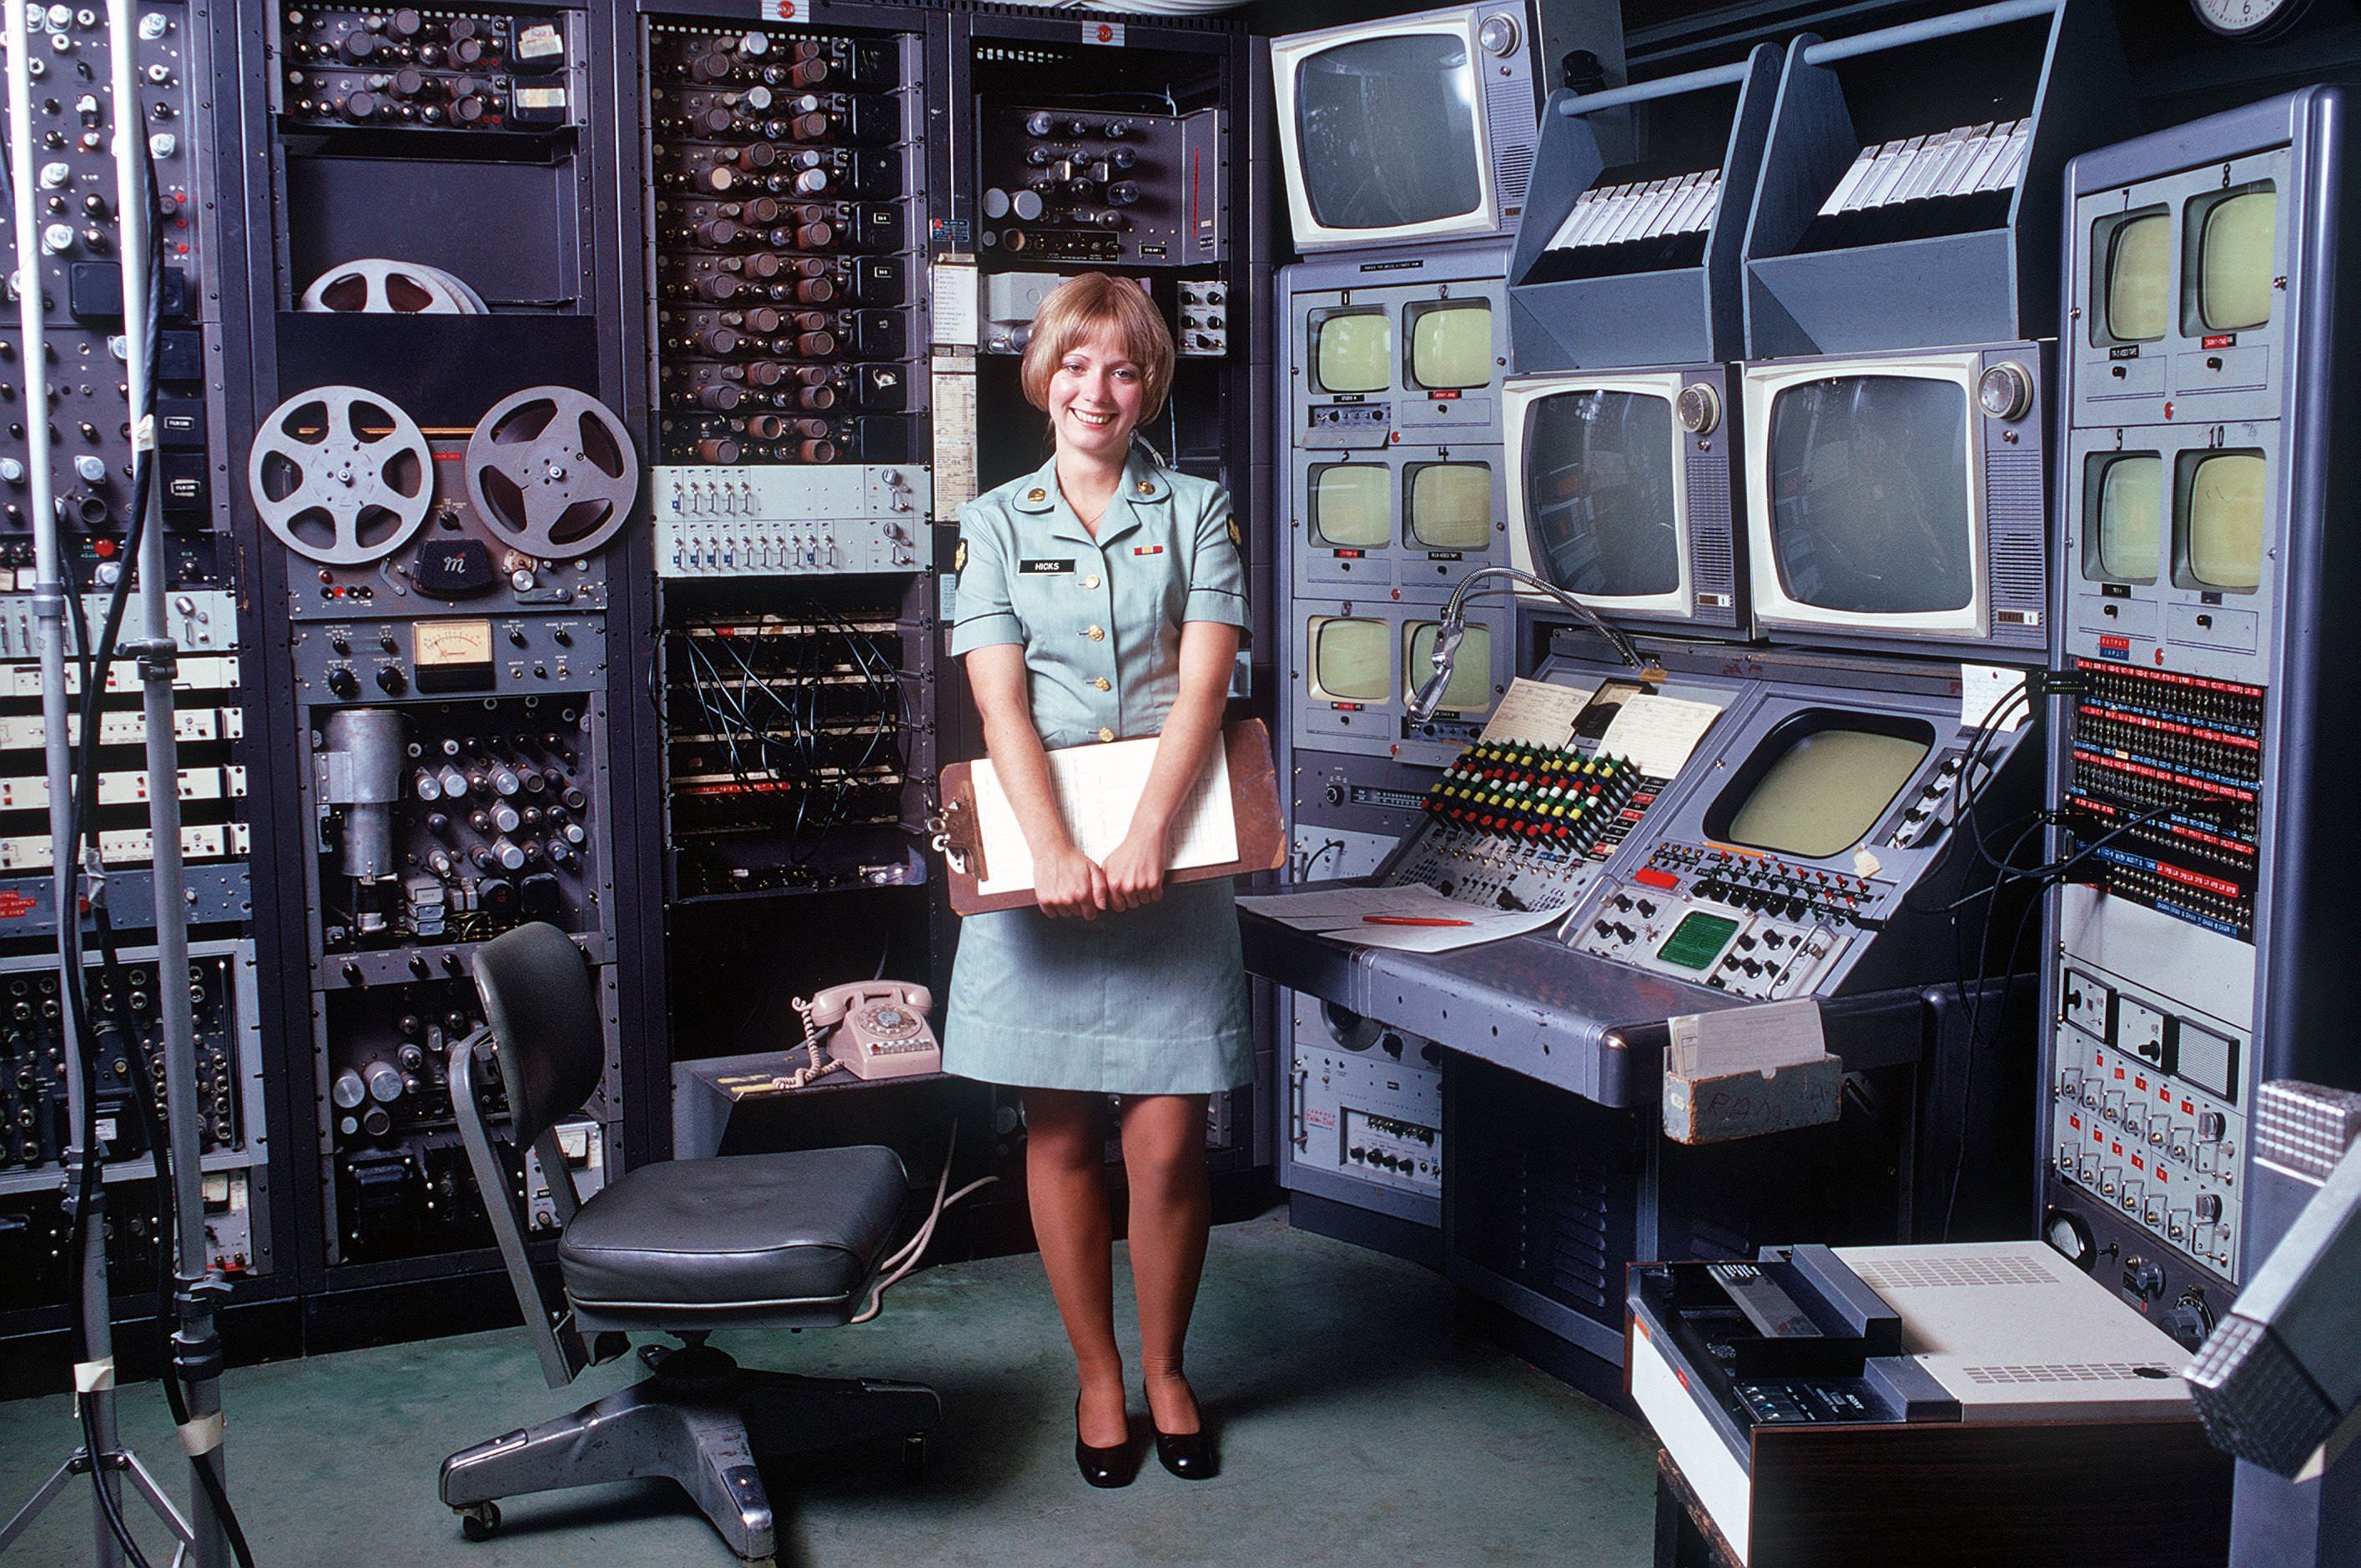 U.S. Army audiovisual technician stands at her videotape editing station, 1973.jpg